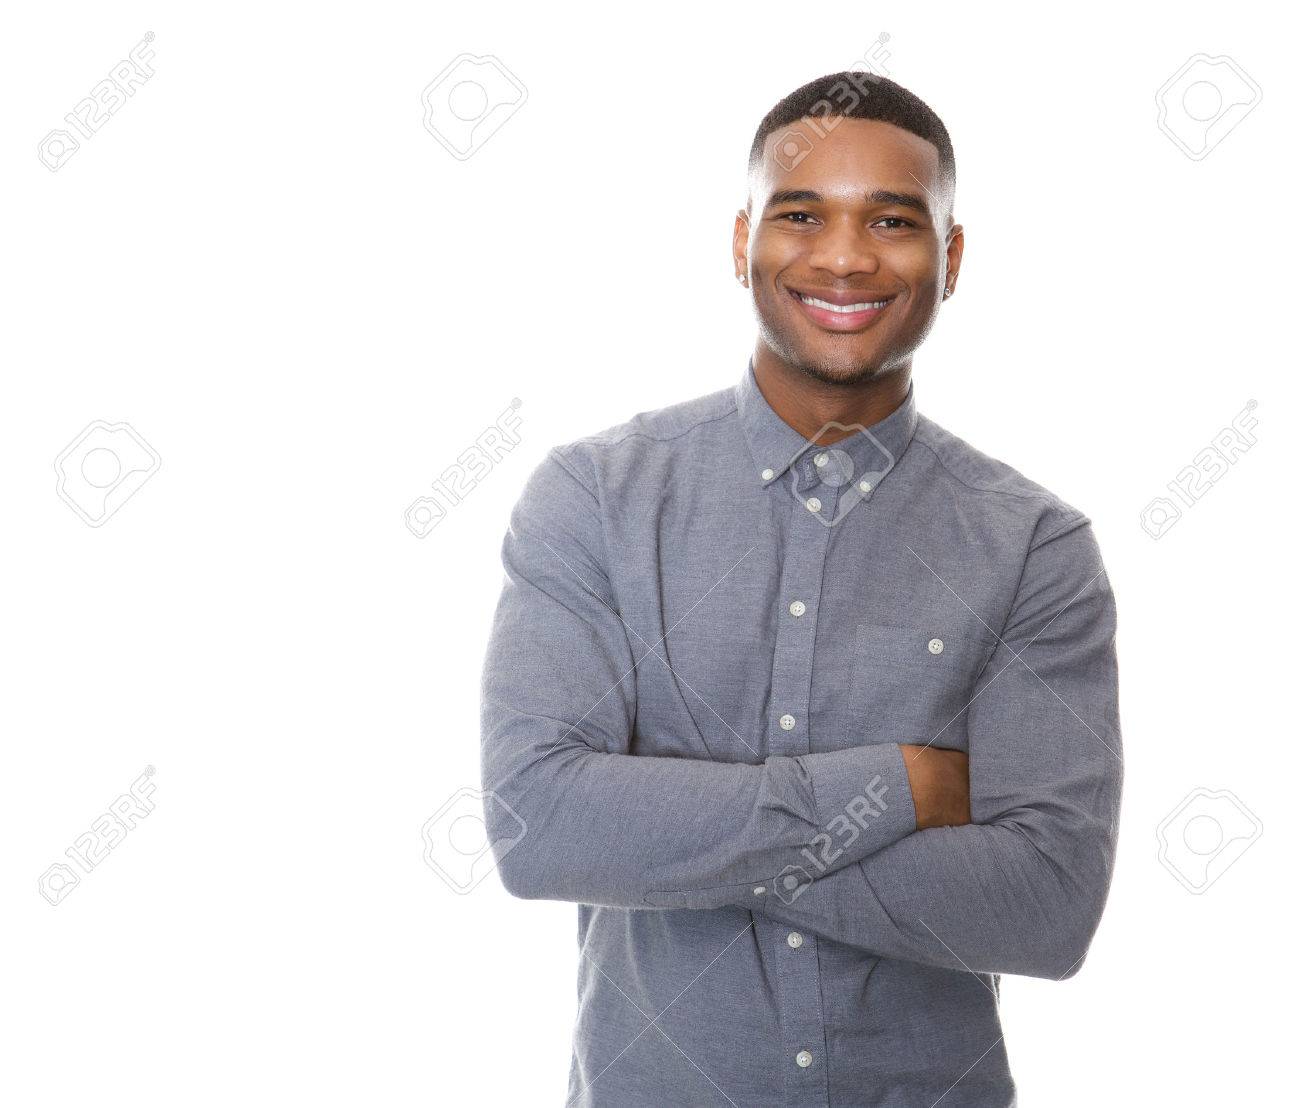 32761649-portrait-of-a-modern-young-black-man-smiling-with-arms-crossed-on-isolated-white-background.jpg